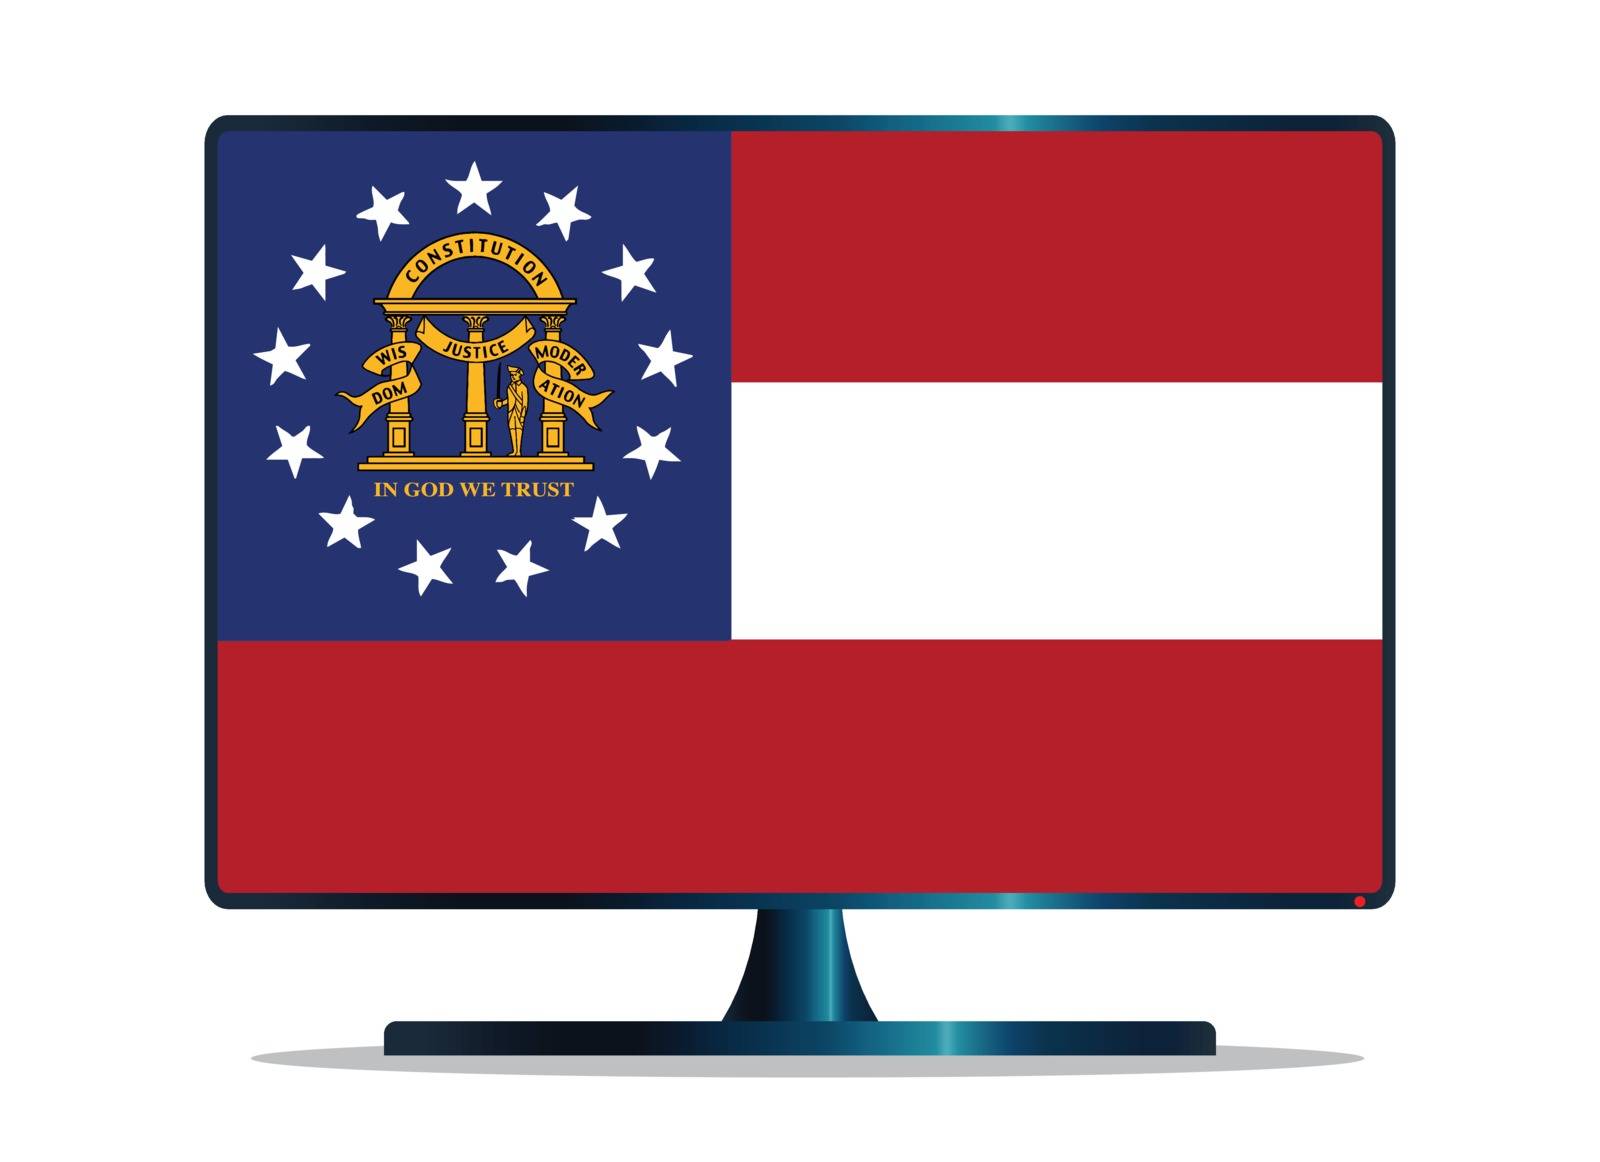 A TV or computer screen with the Georgia state flag